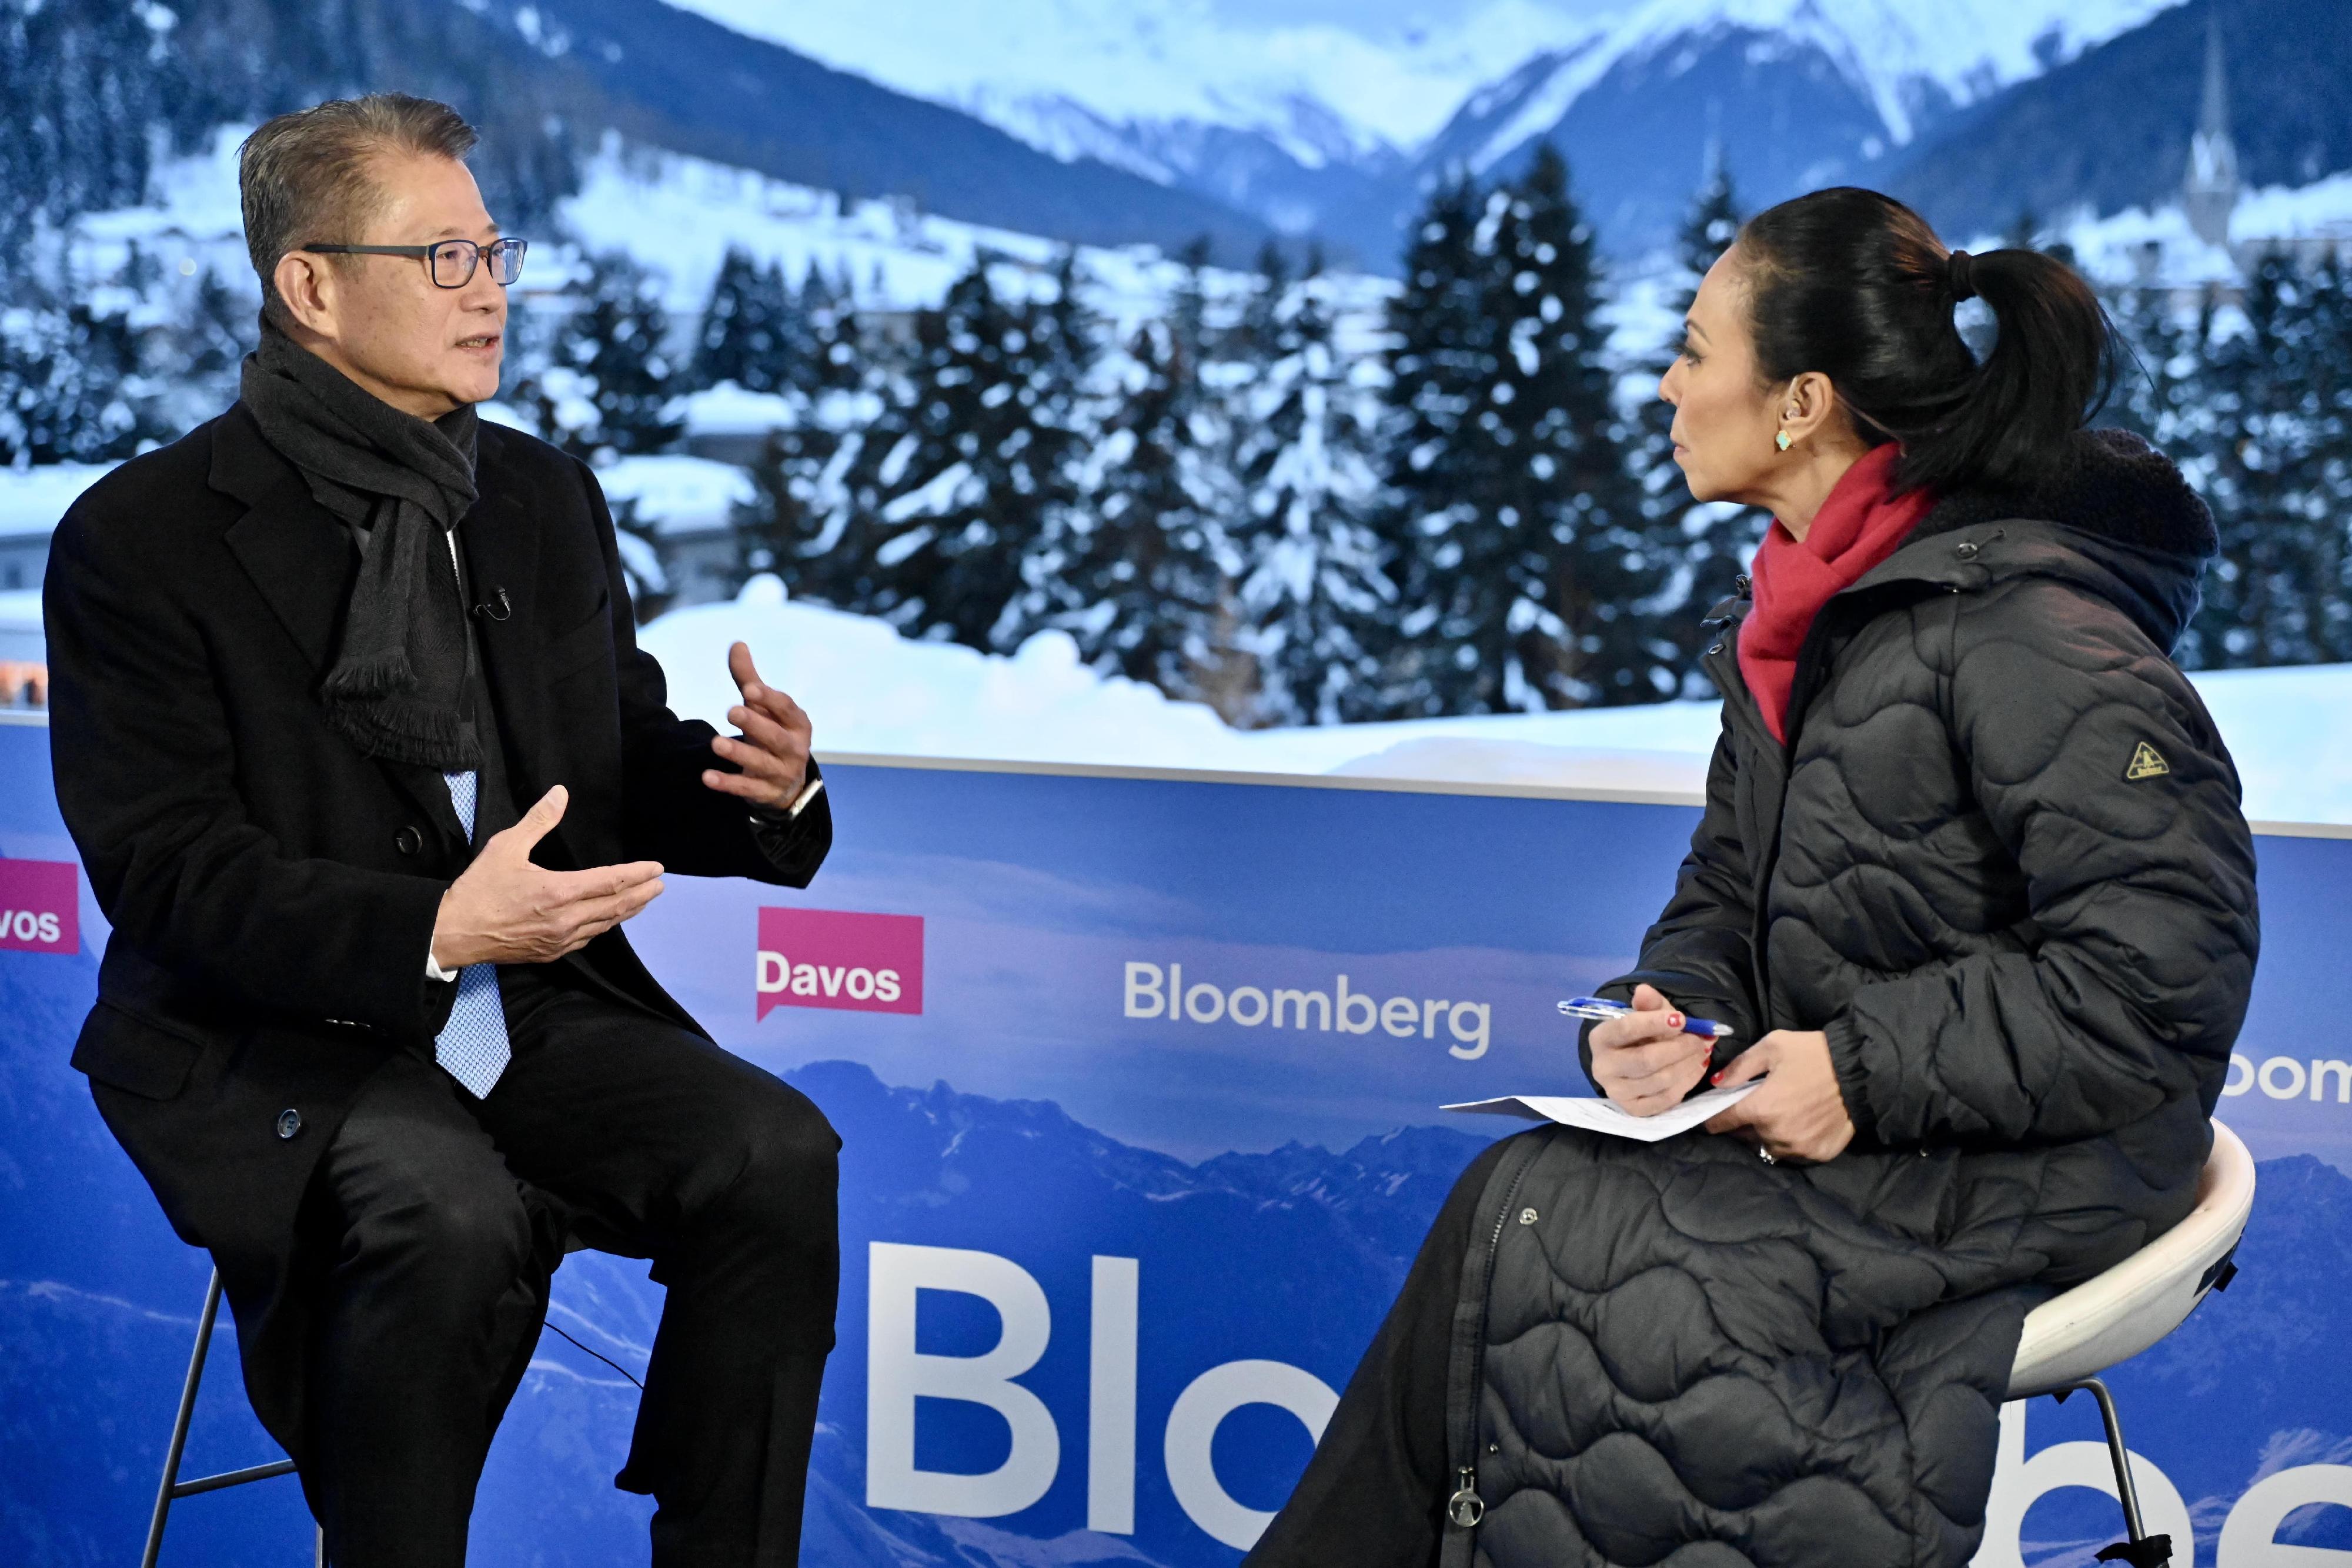 The Financial Secretary, Mr Paul Chan, continued his visit to Davos, Switzerland, yesterday (January 17, Davos time). Photo shows Mr Chan (left) being interviewed by Bloomberg.